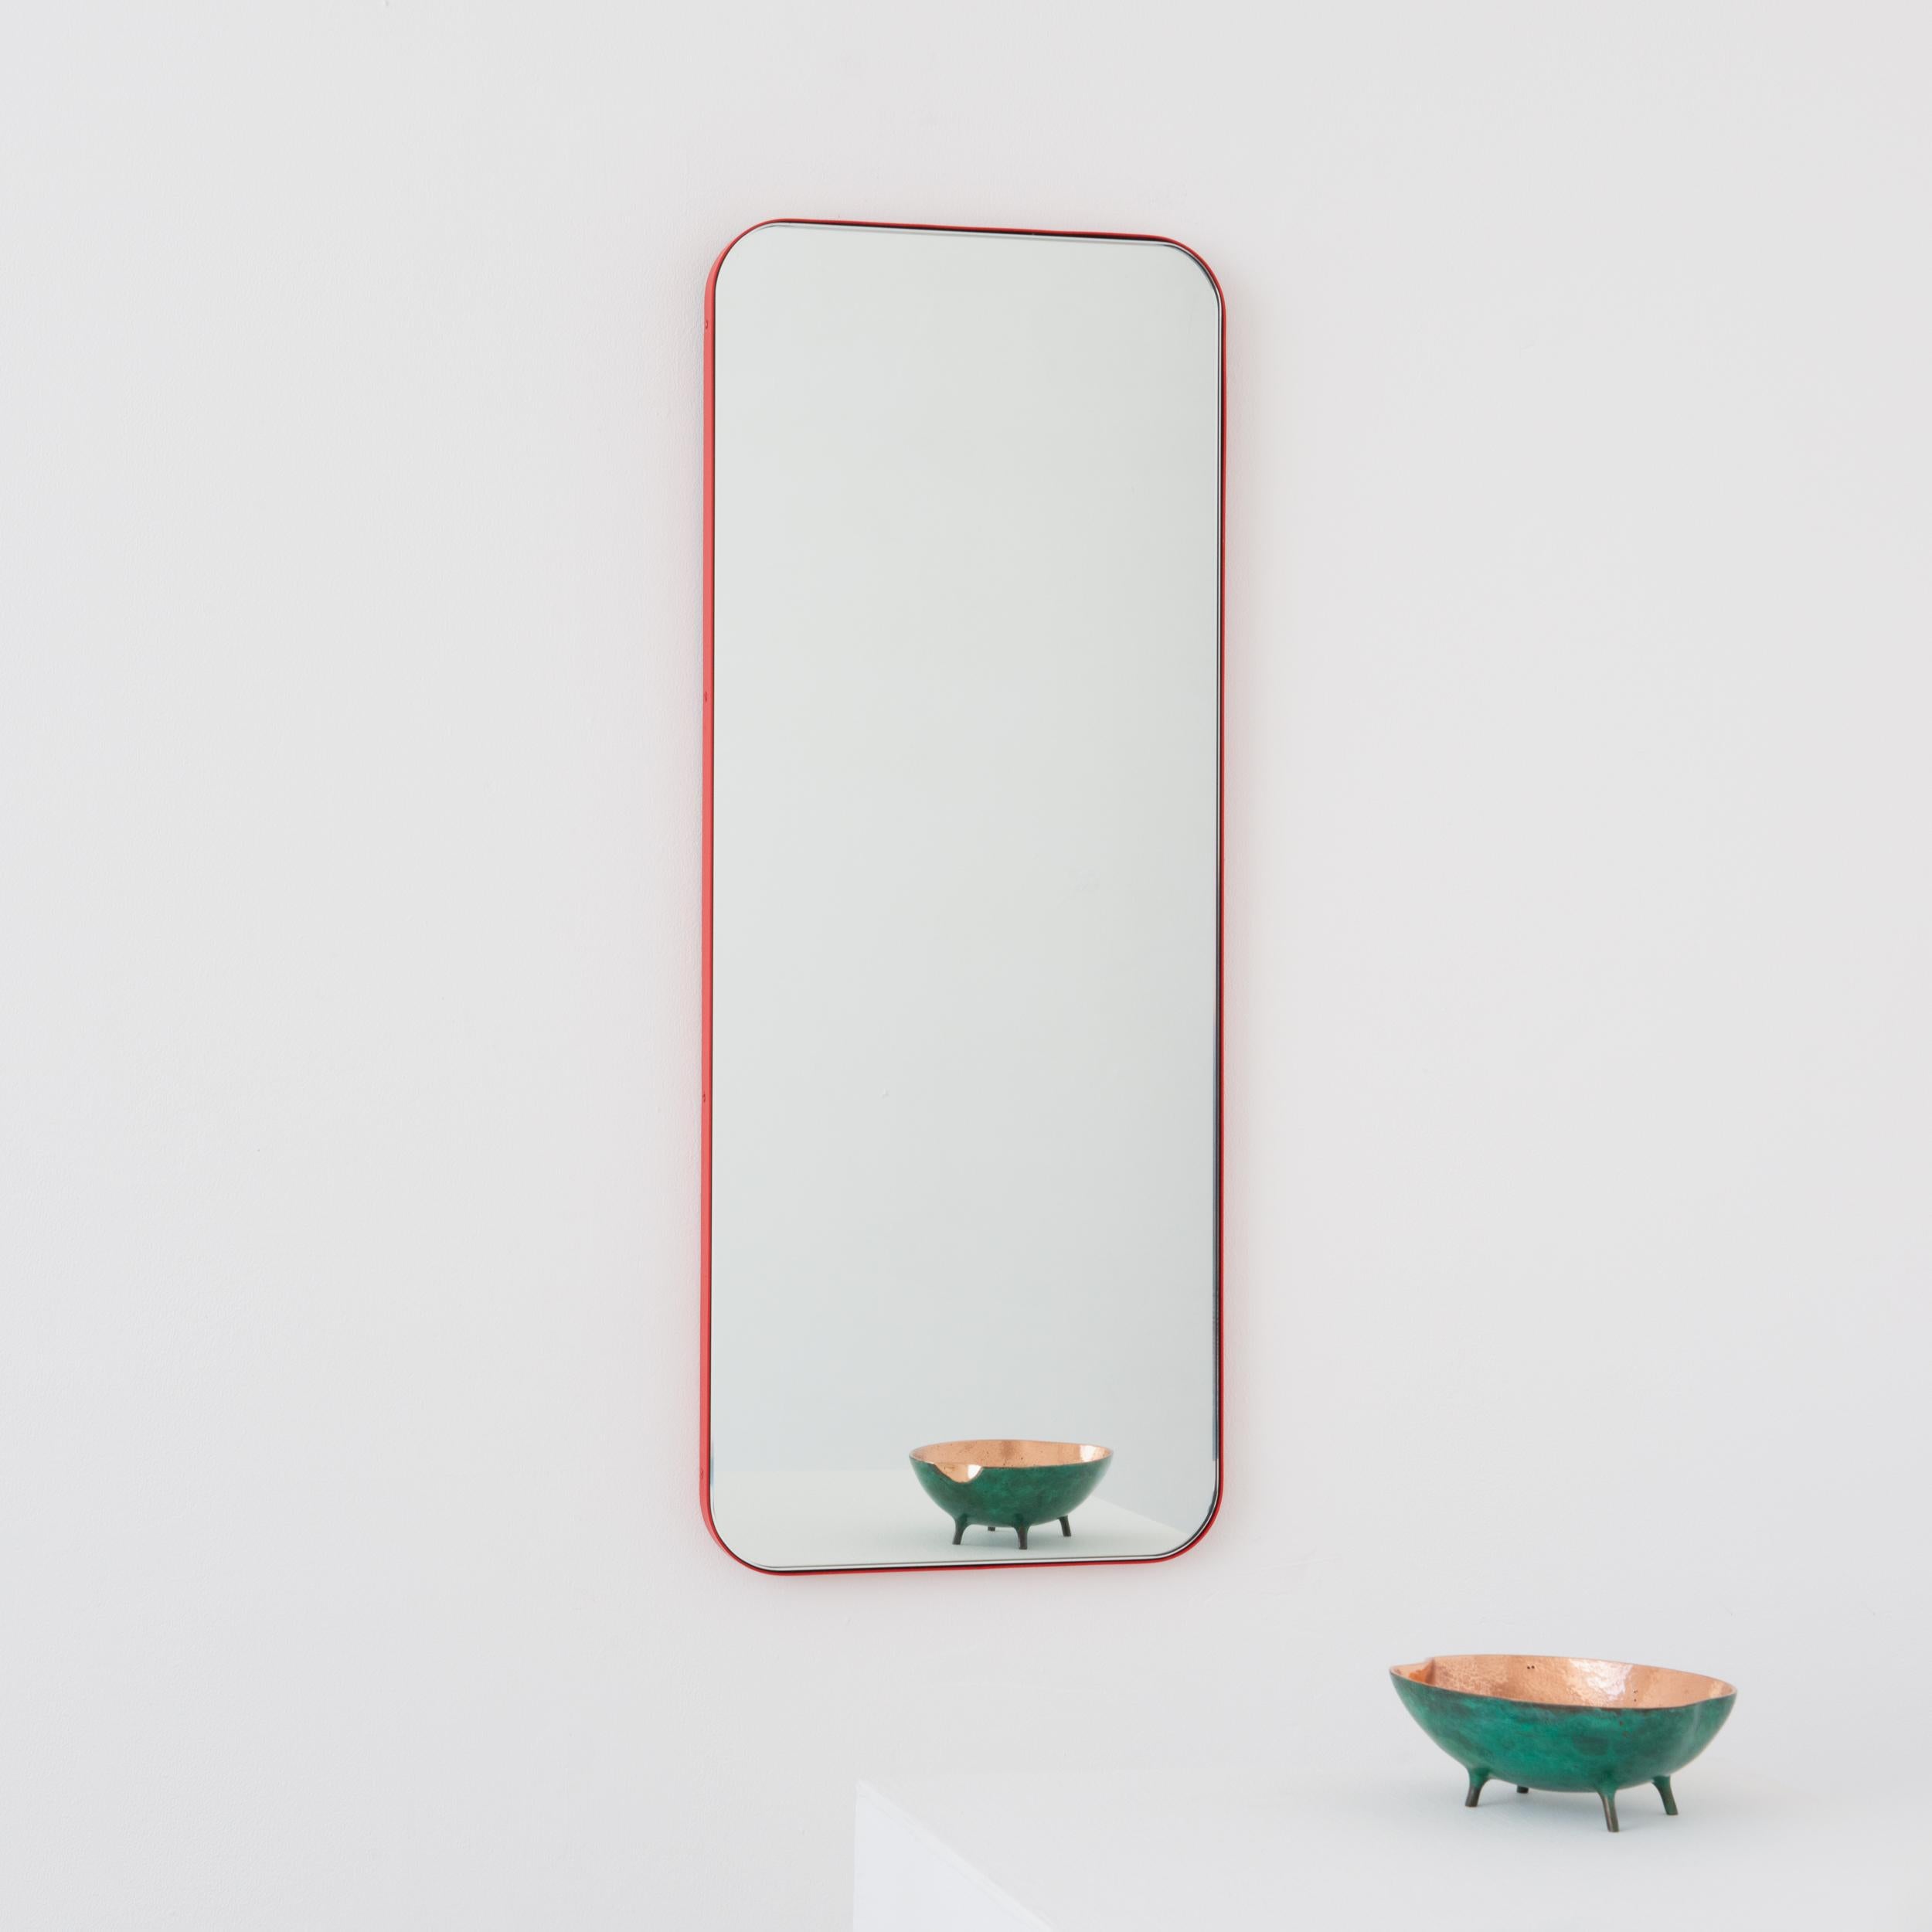 Minimalist rectangular mirror with a modern red frame. Part of the charming Quadris collection, designed and handcrafted in London, UK. 

Supplied fitted with a specialist z-bar for an easy installation. A split batten hanging system to fit the